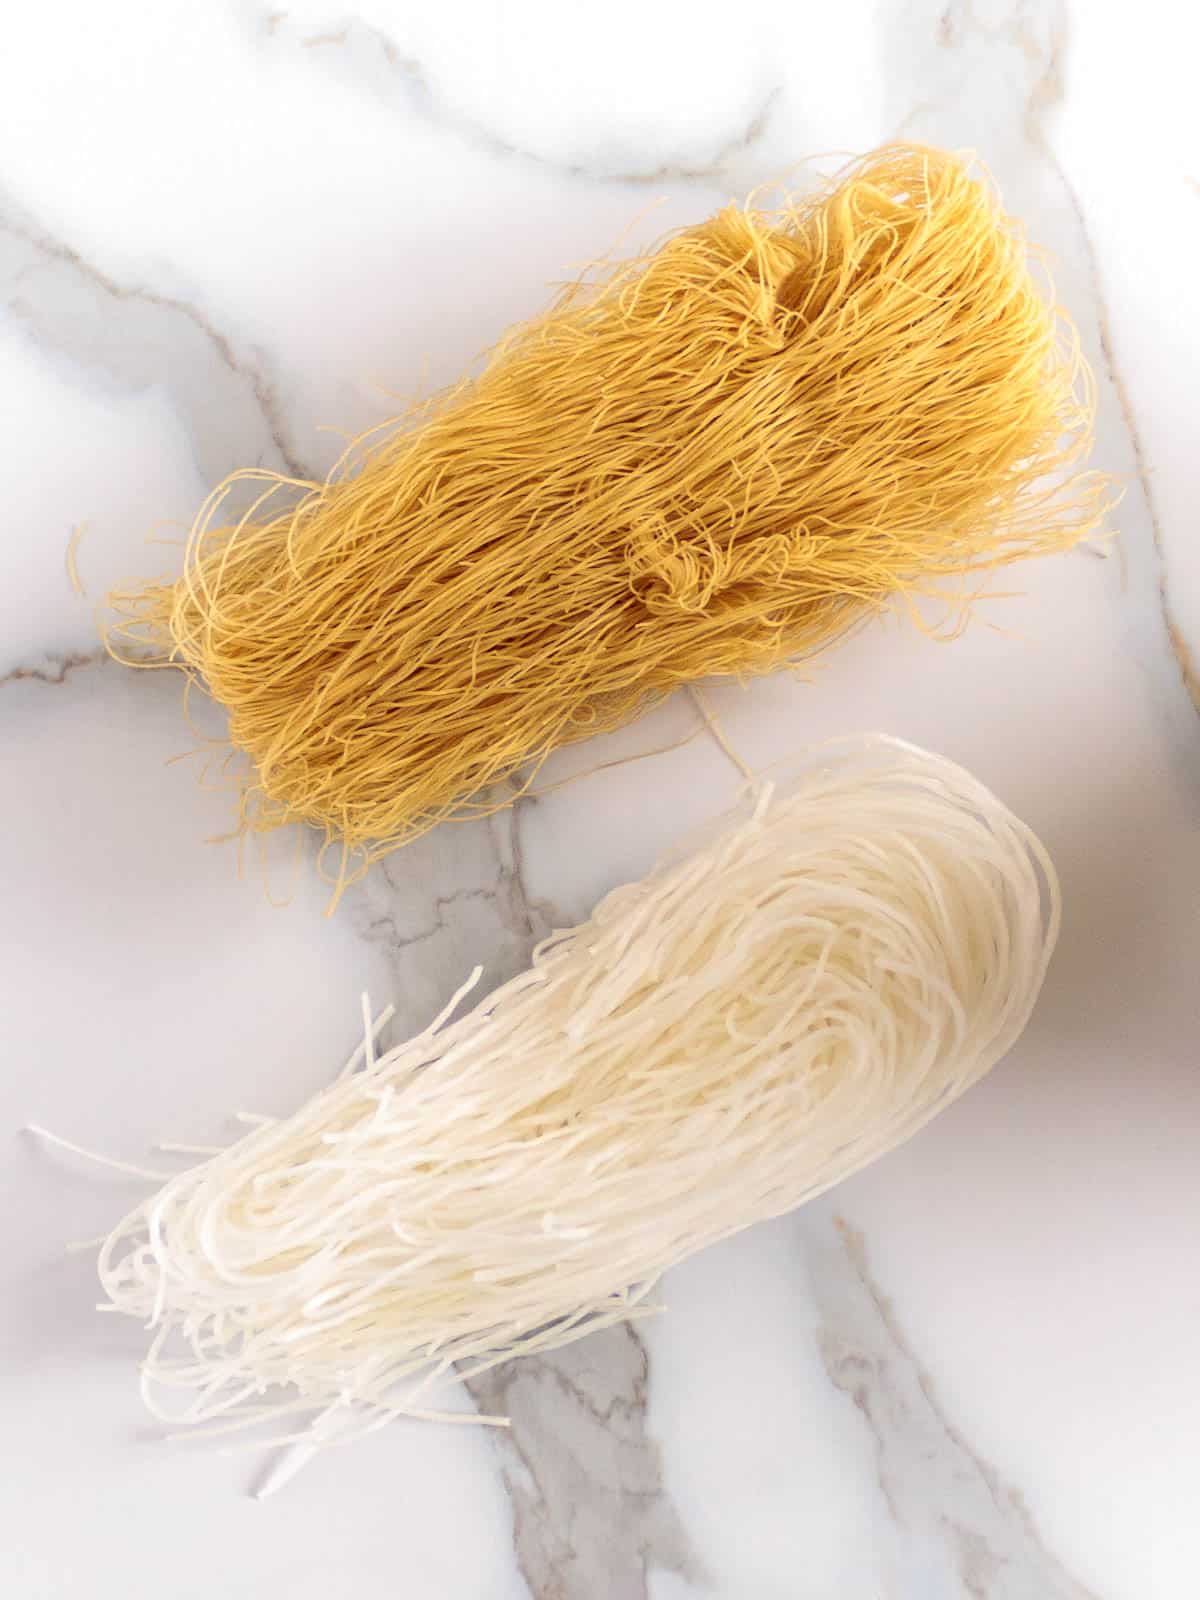 Thin brown rice noodles compared to white mung bean starch noodles.